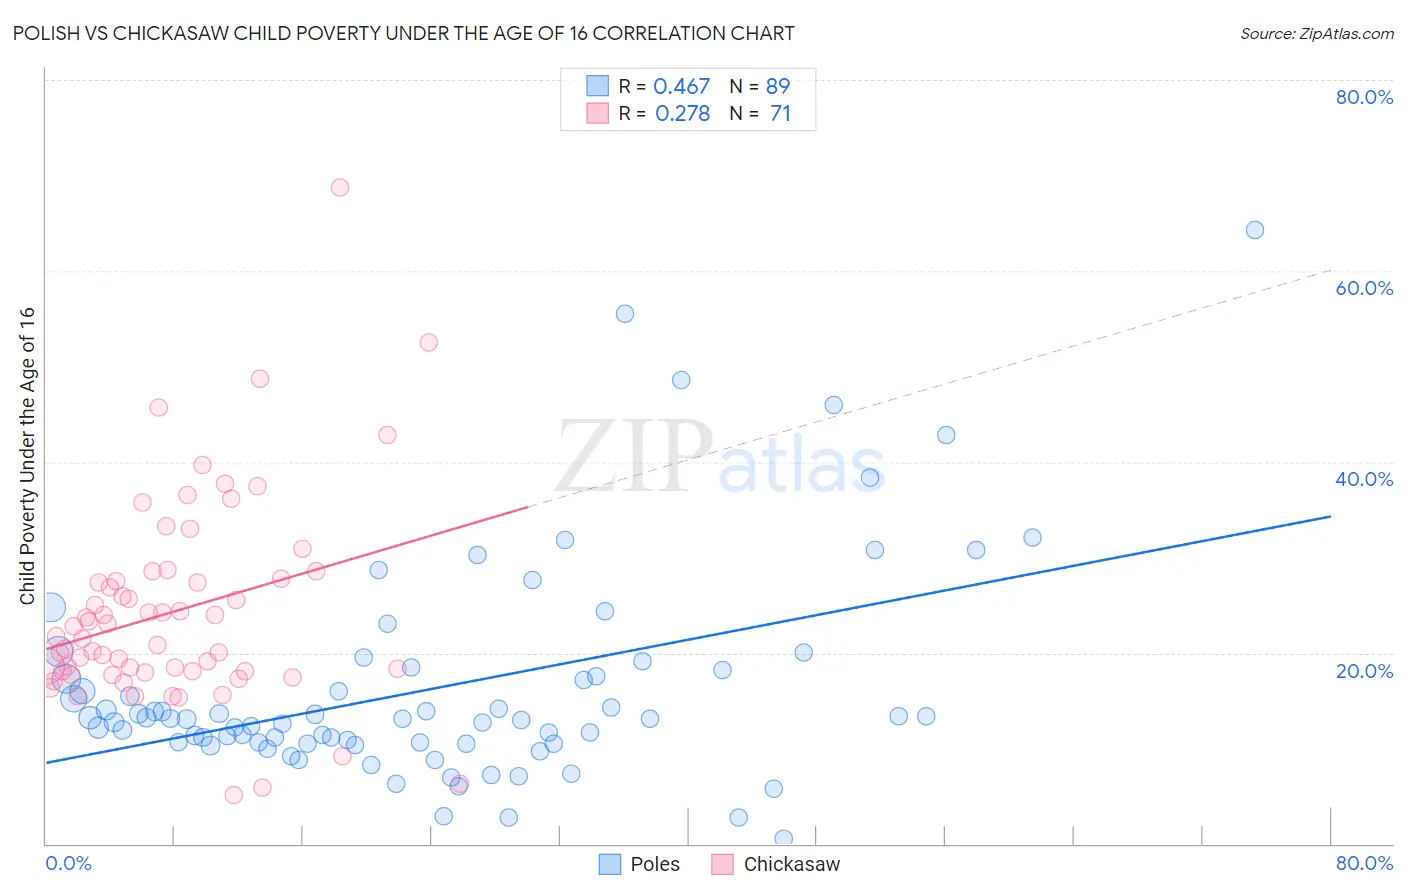 Polish vs Chickasaw Child Poverty Under the Age of 16